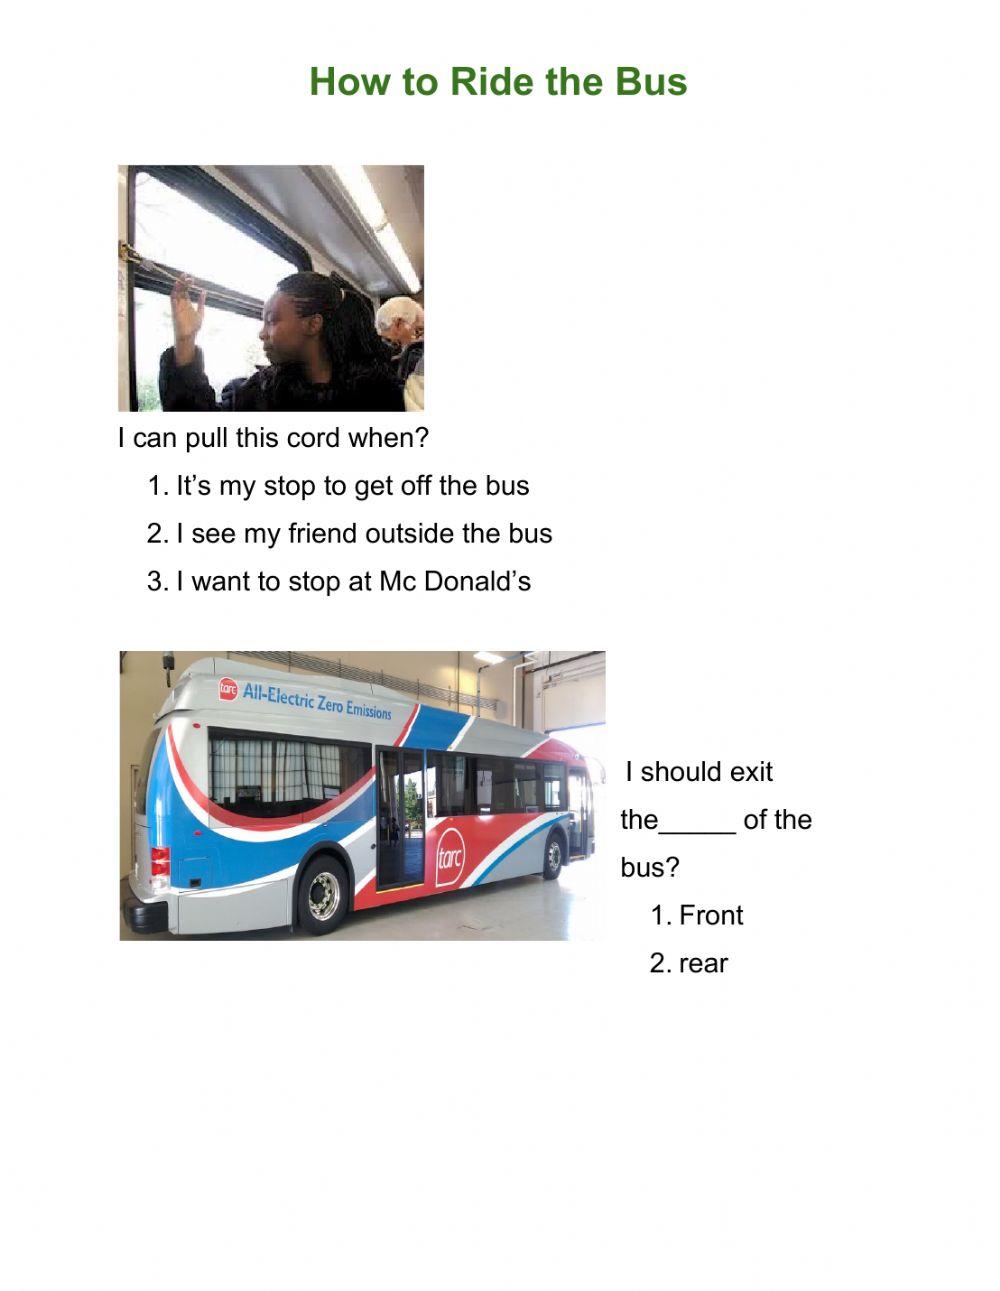 How to ride the bus